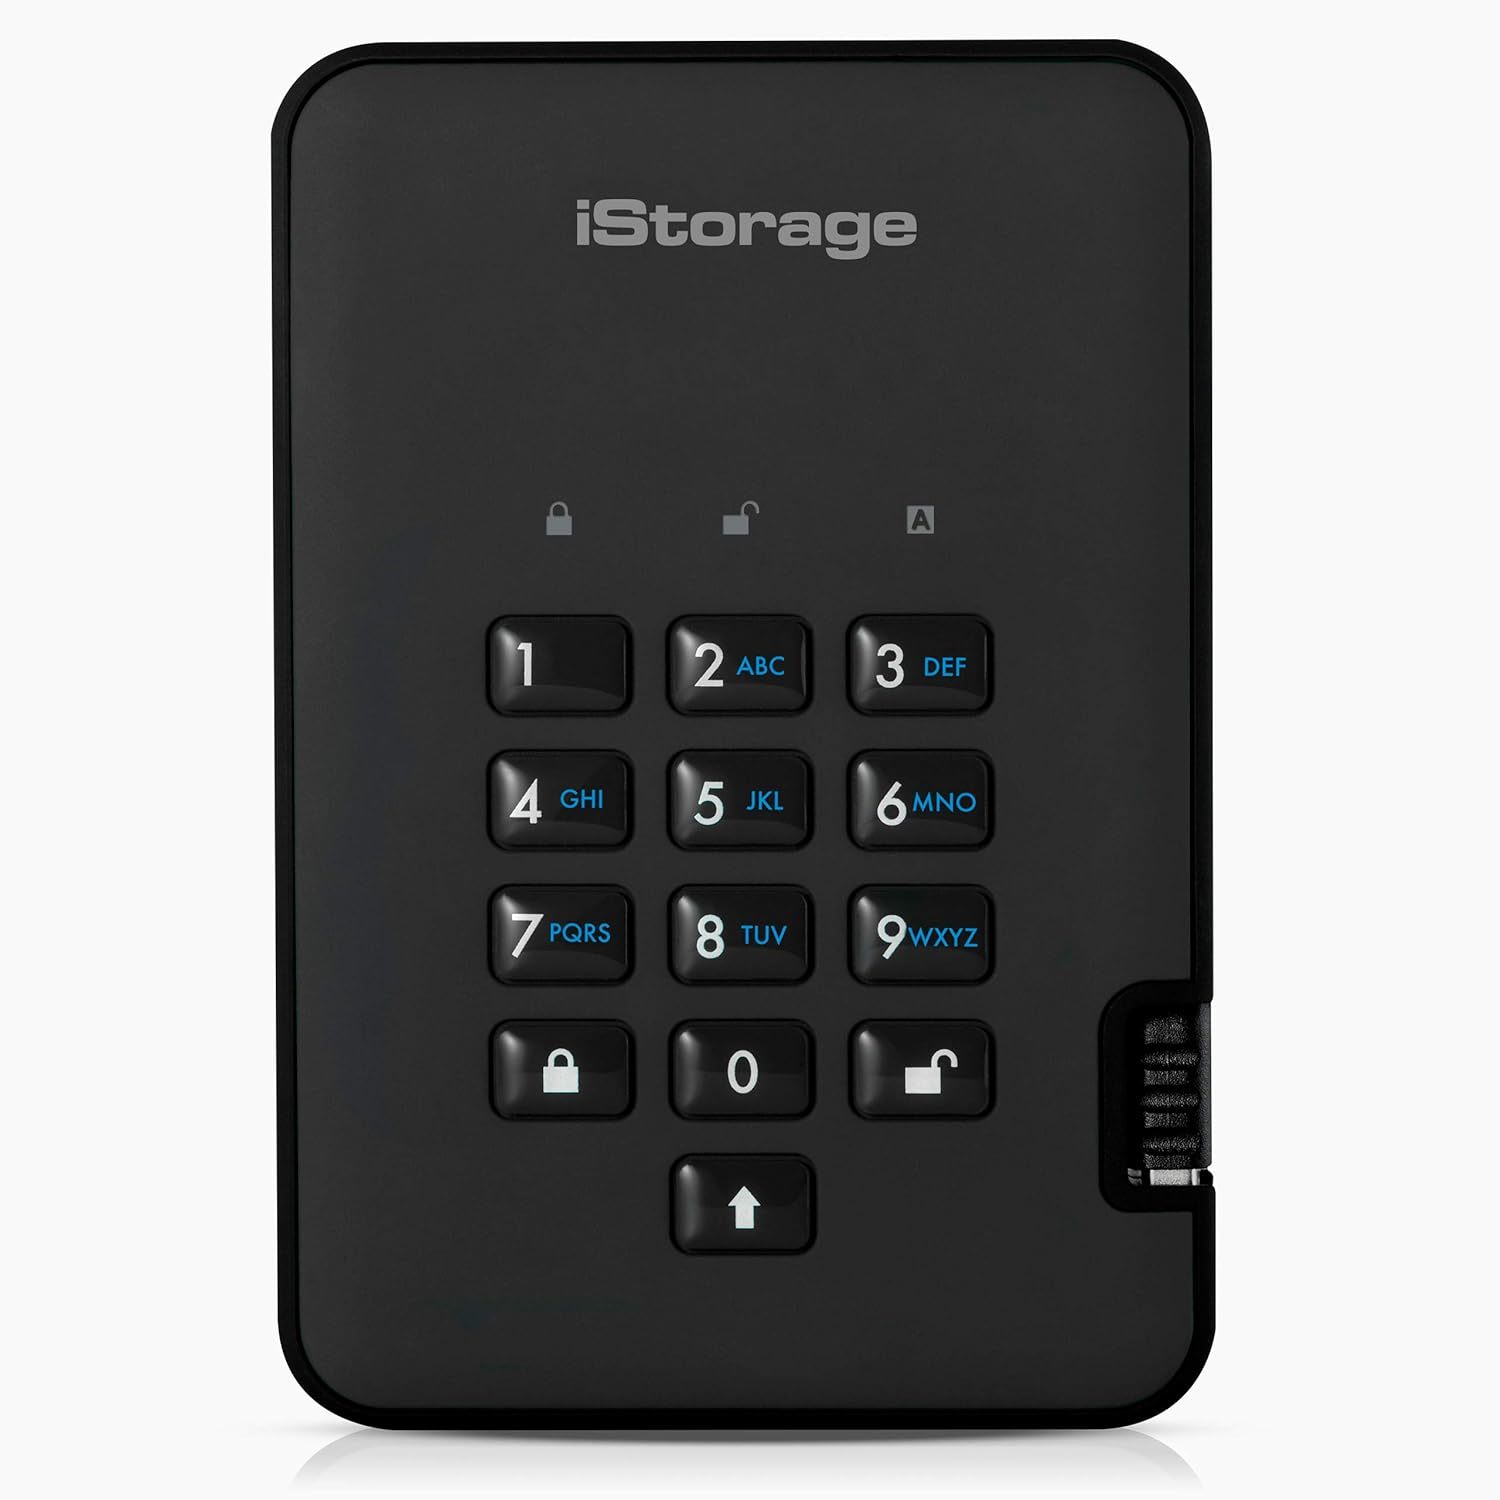 iStorage diskAshur2 HDD 2 TB | Secure Portable Hard Drive | Password Protected | - $306.99